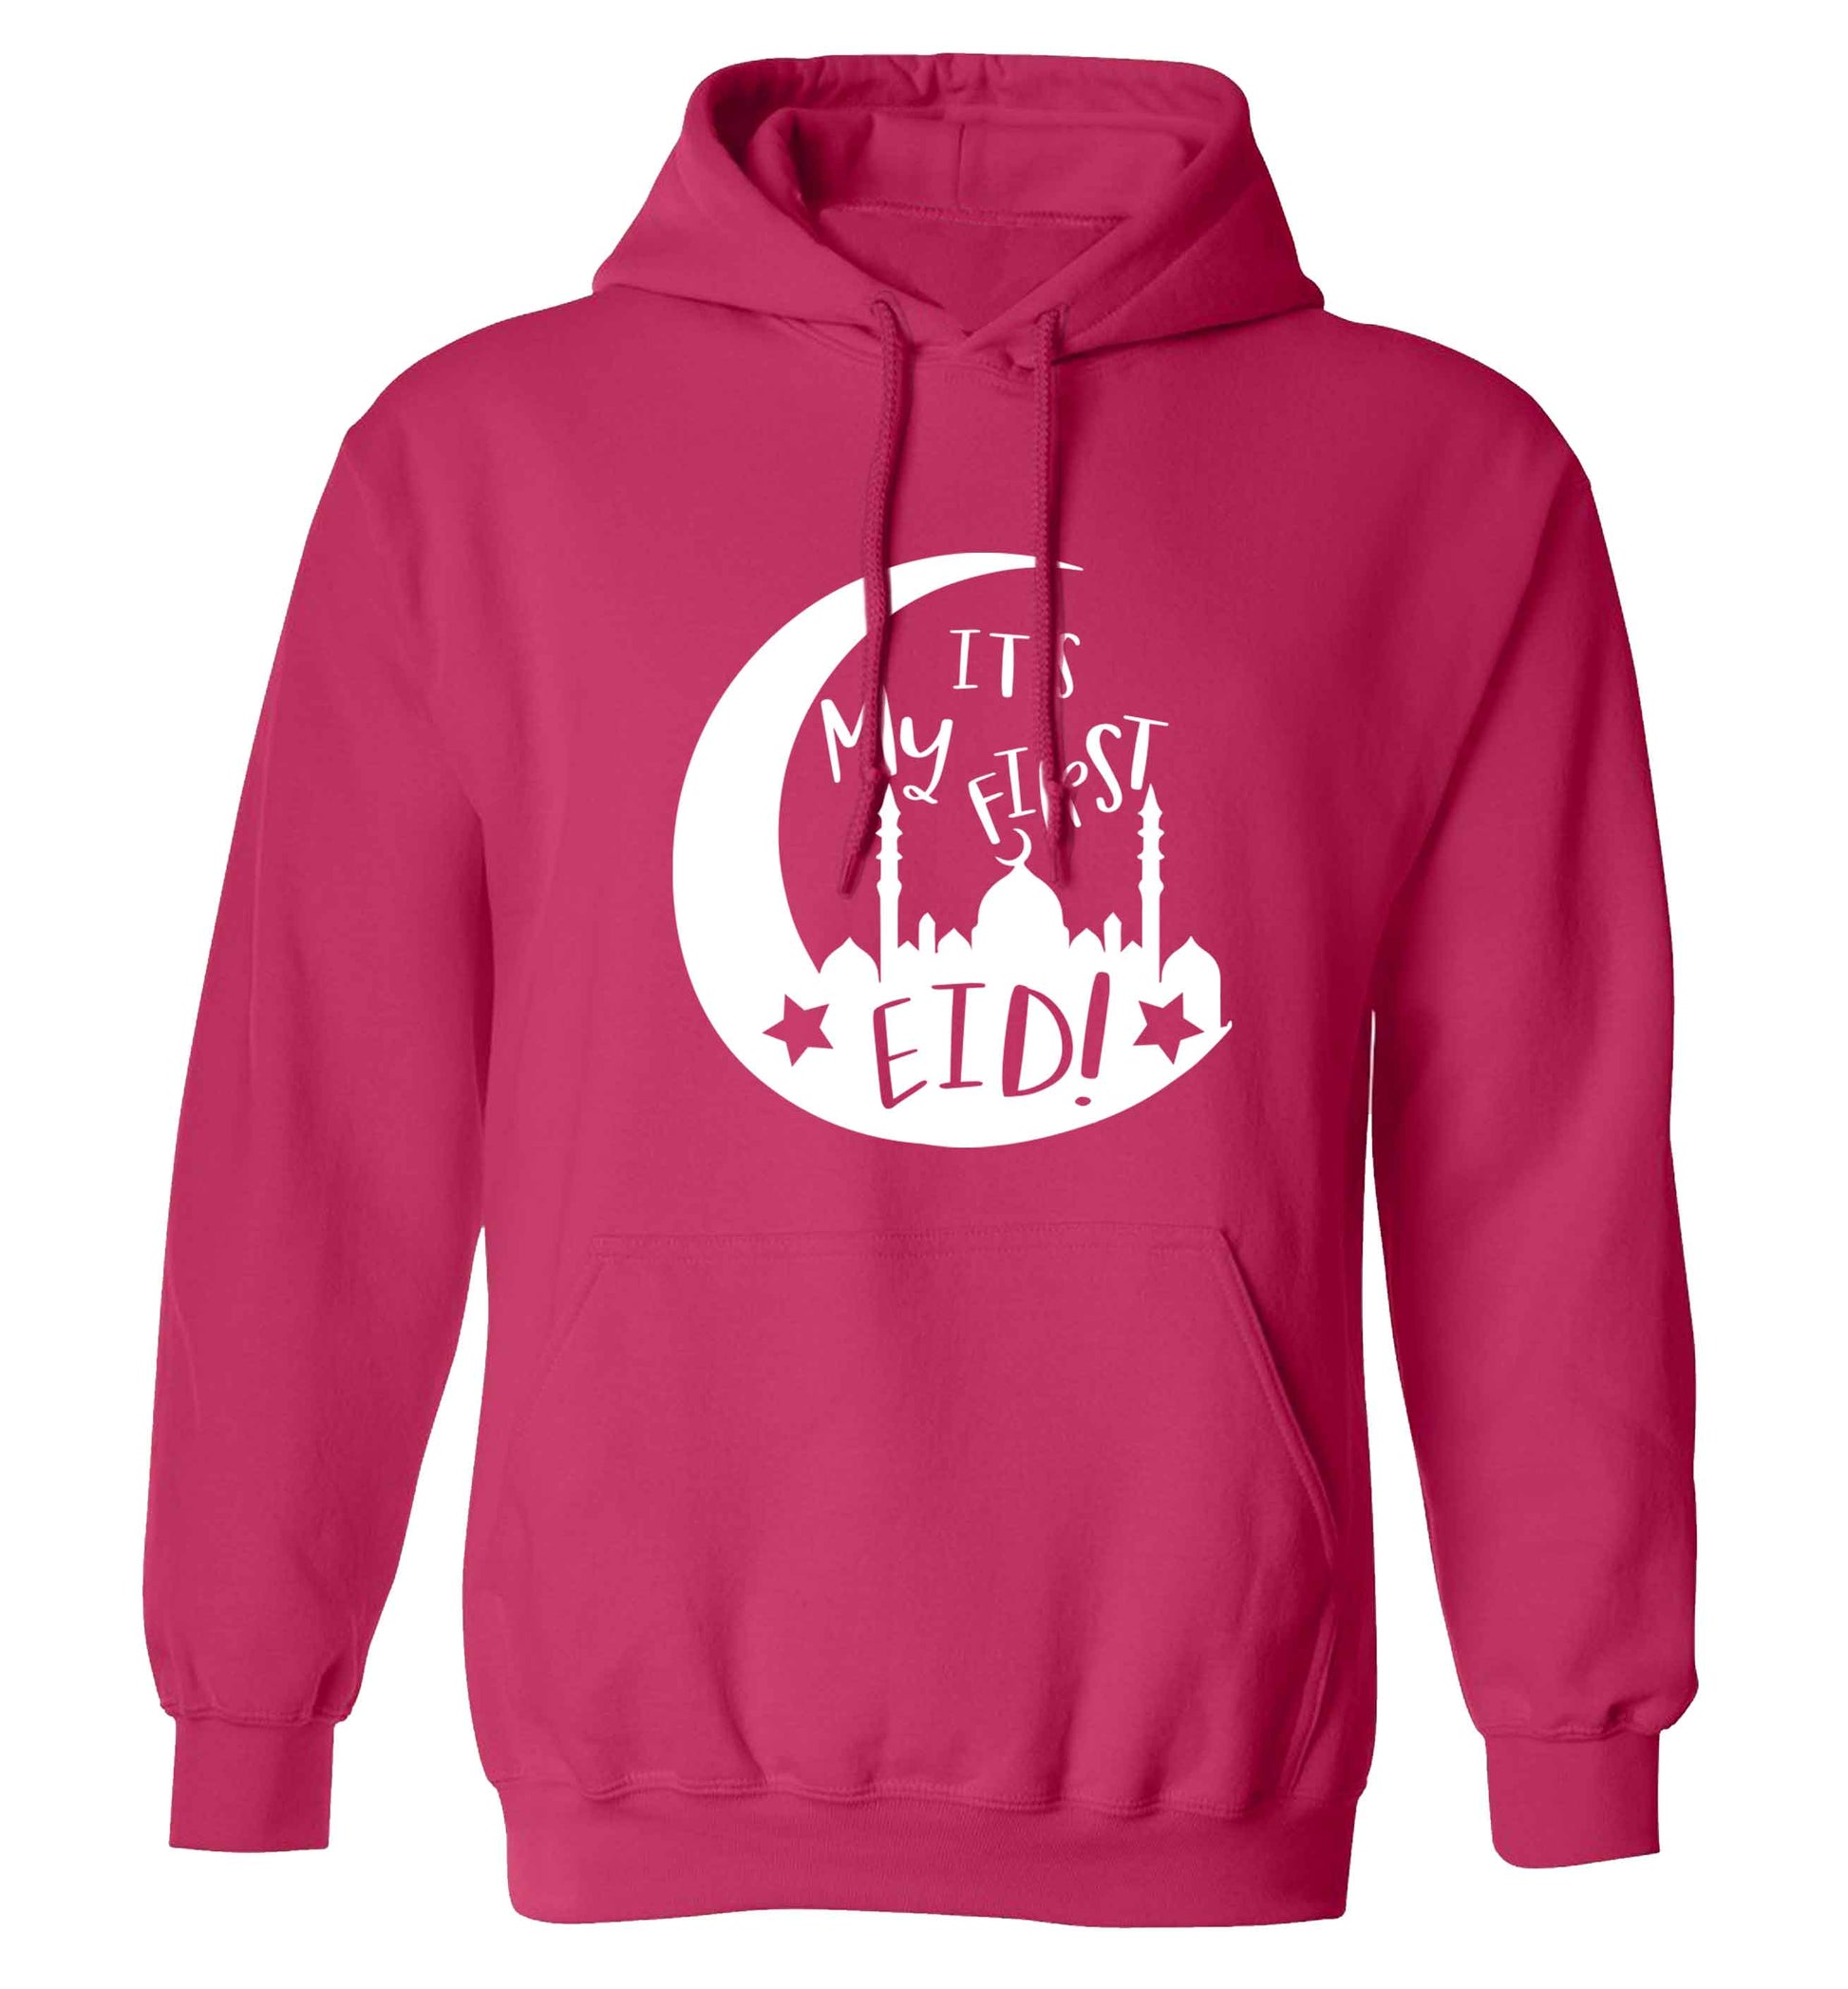 It's my first Eid moon adults unisex pink hoodie 2XL